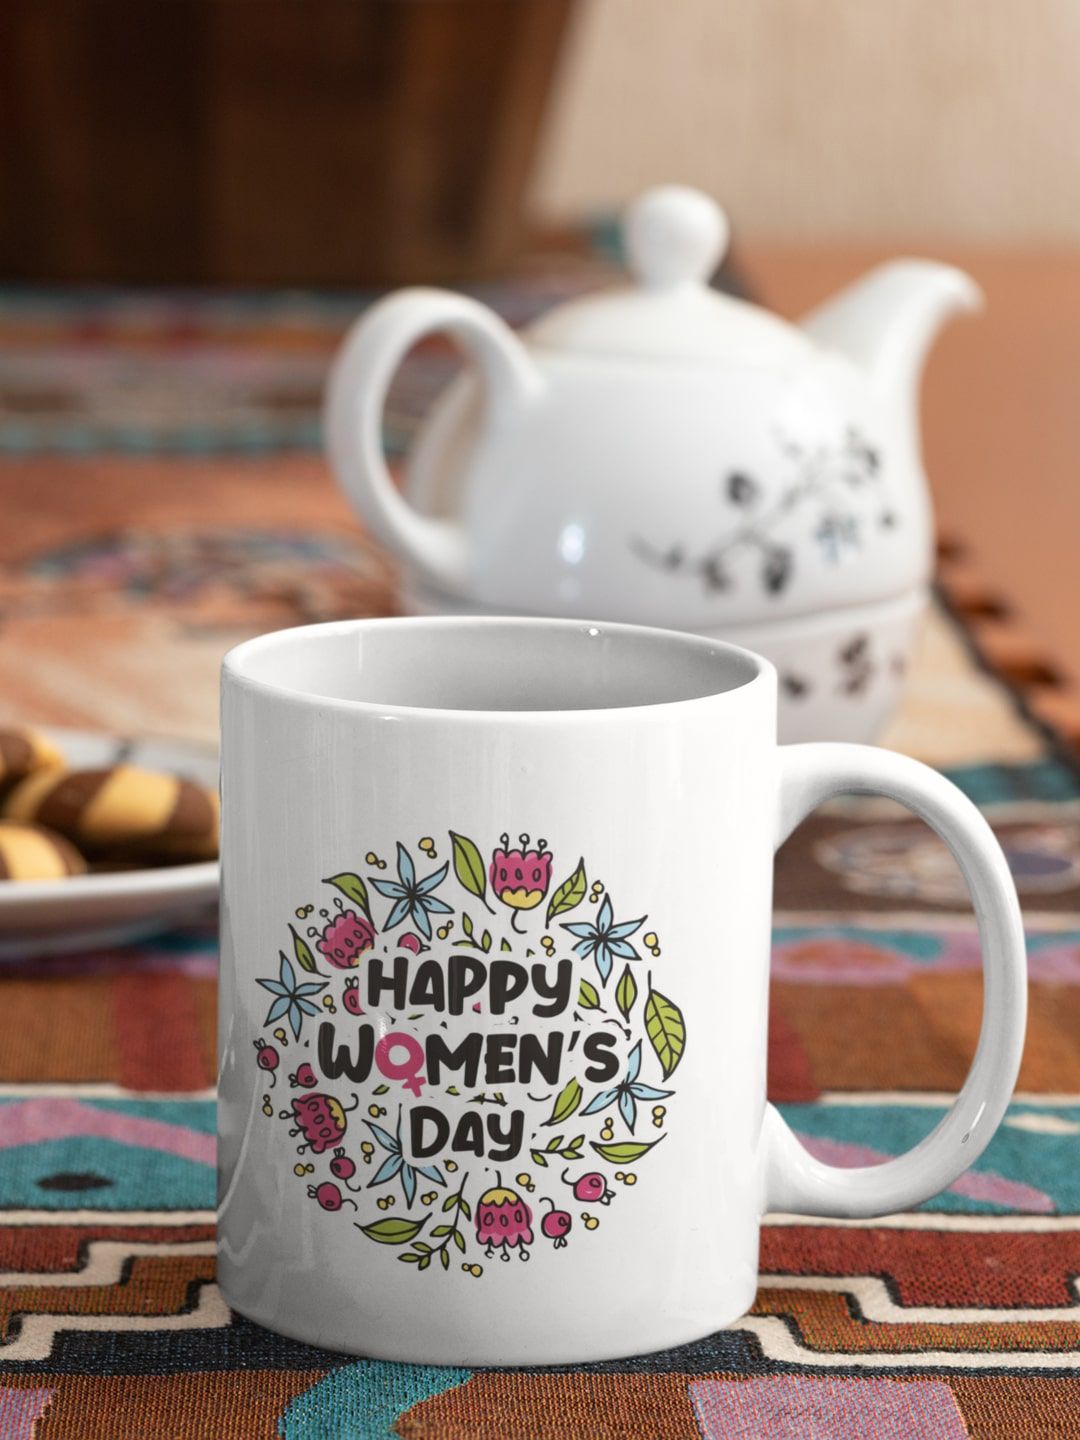 Oye Happy White & Green Printed Ceramic Glossy Mugs Set of Cups and Mugs Price in India